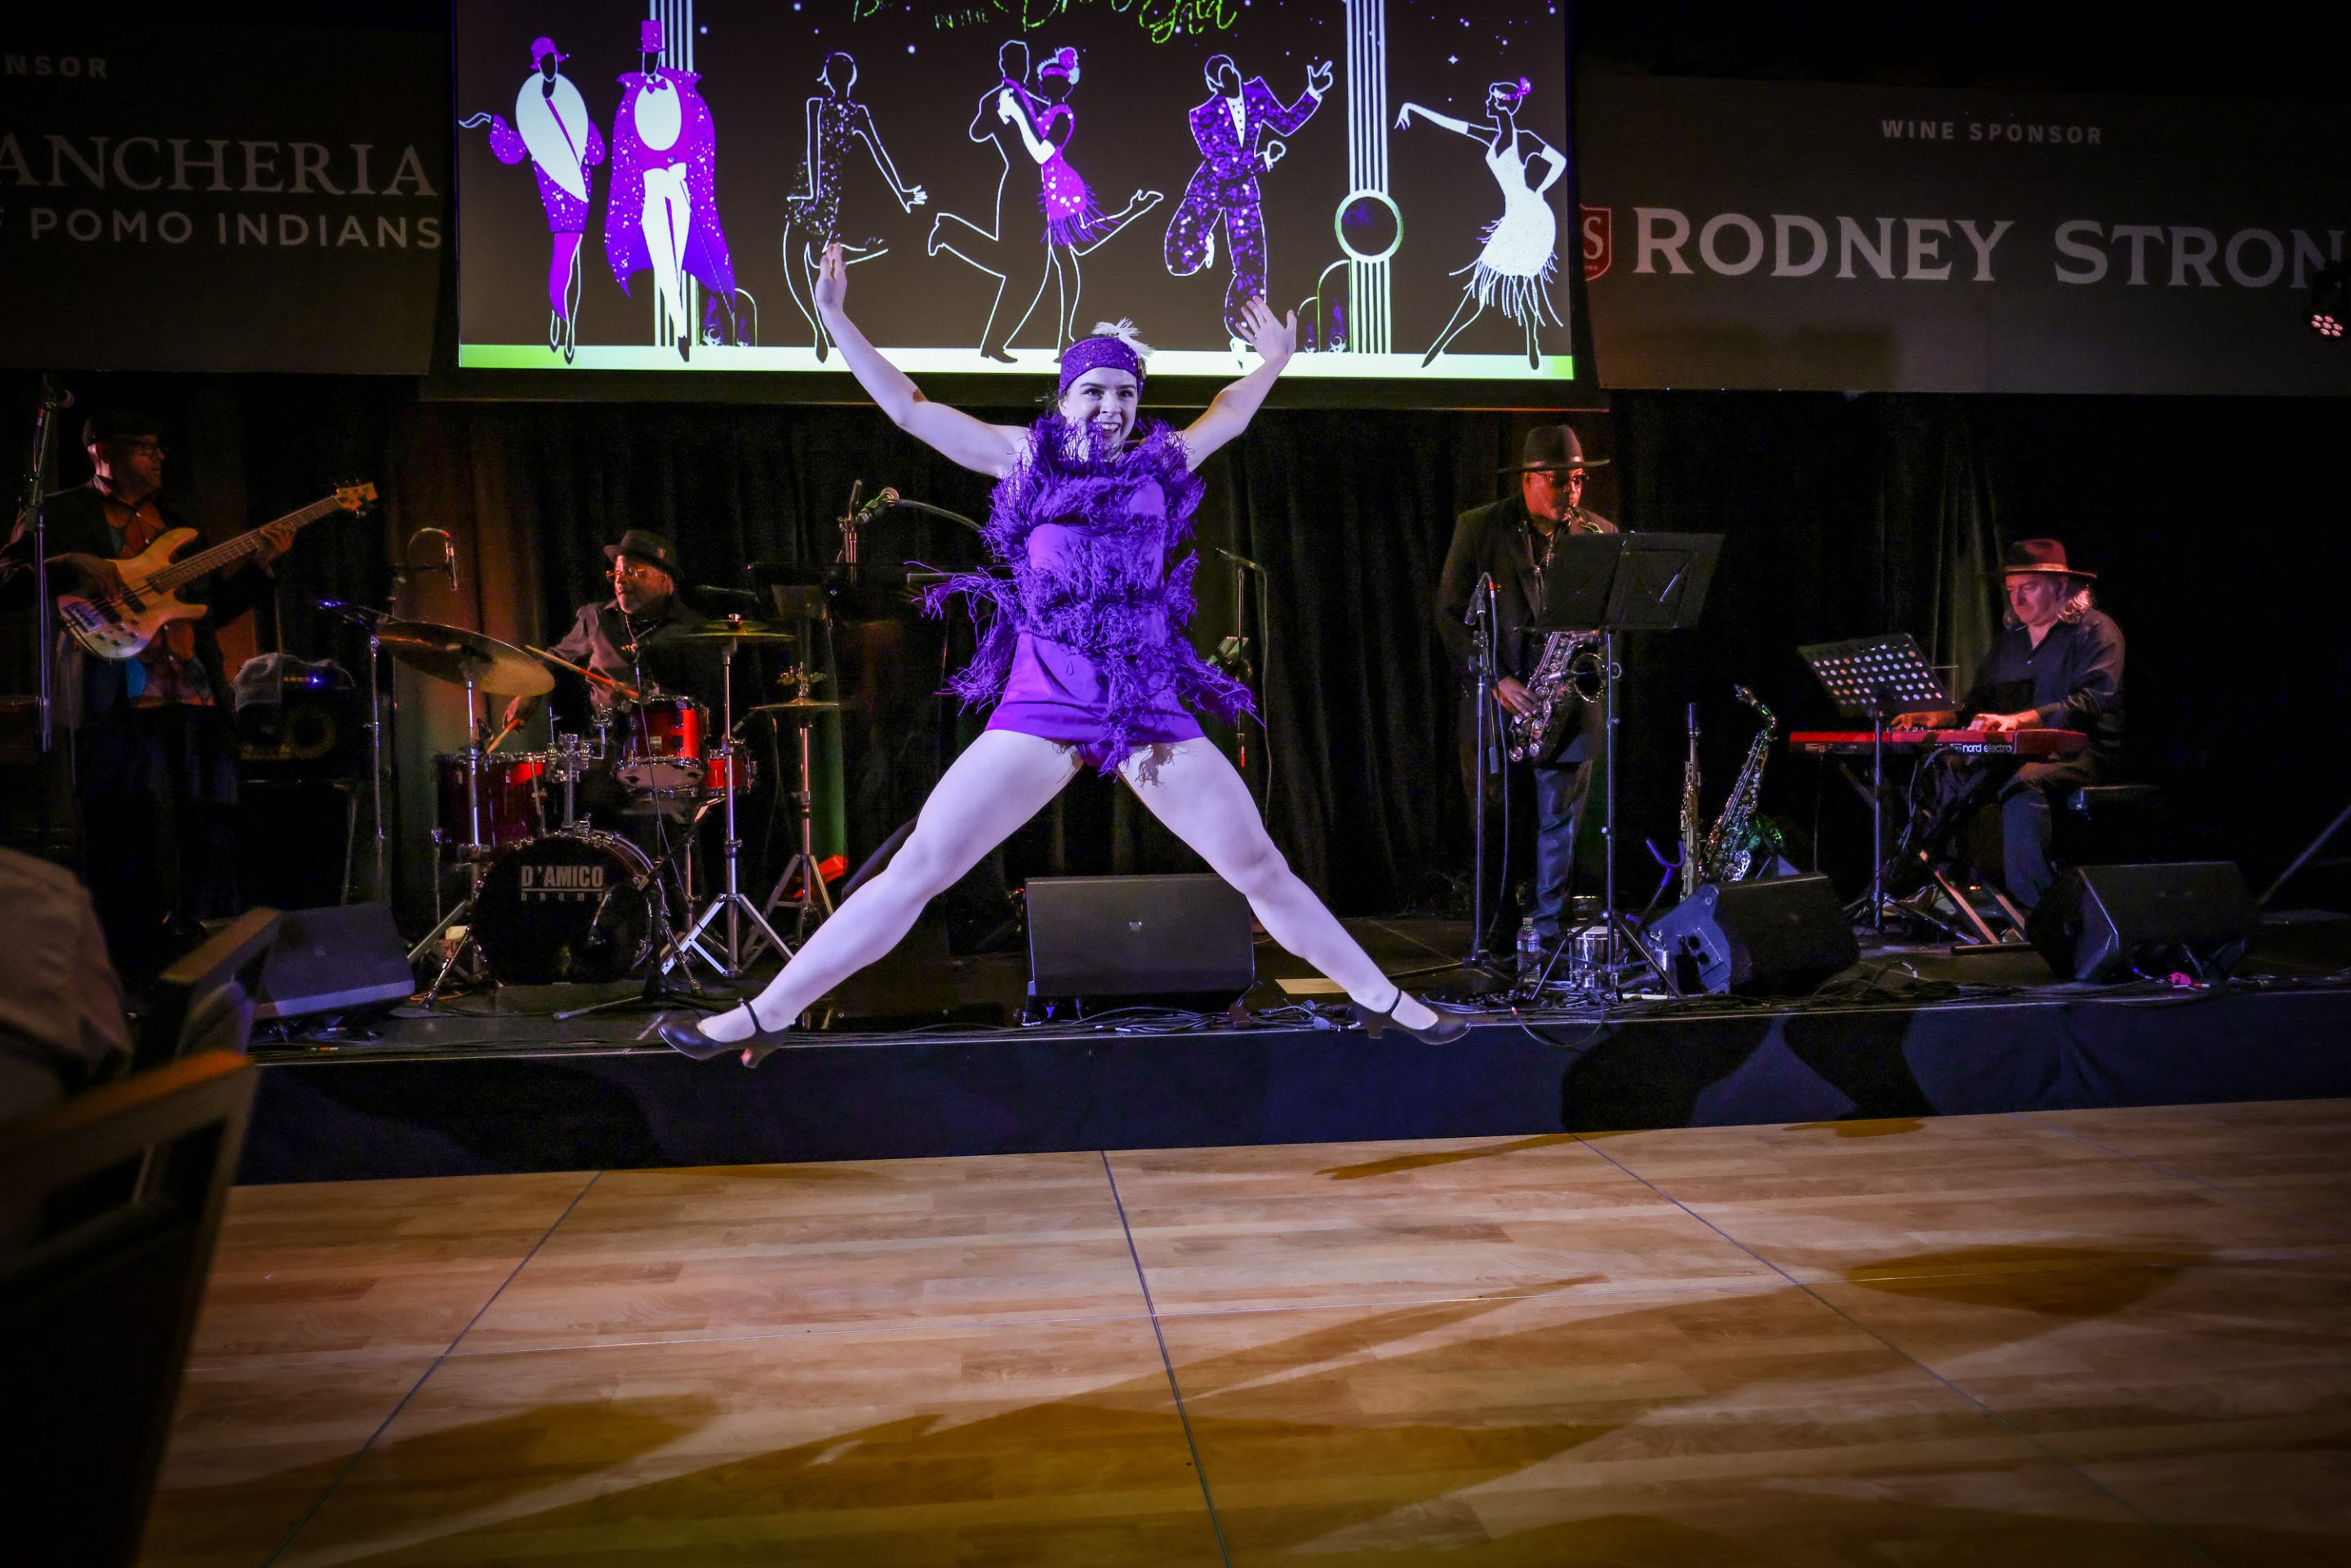 A woman in a purple dress dancing on stage at a Santa Rosa Non-Profit event.